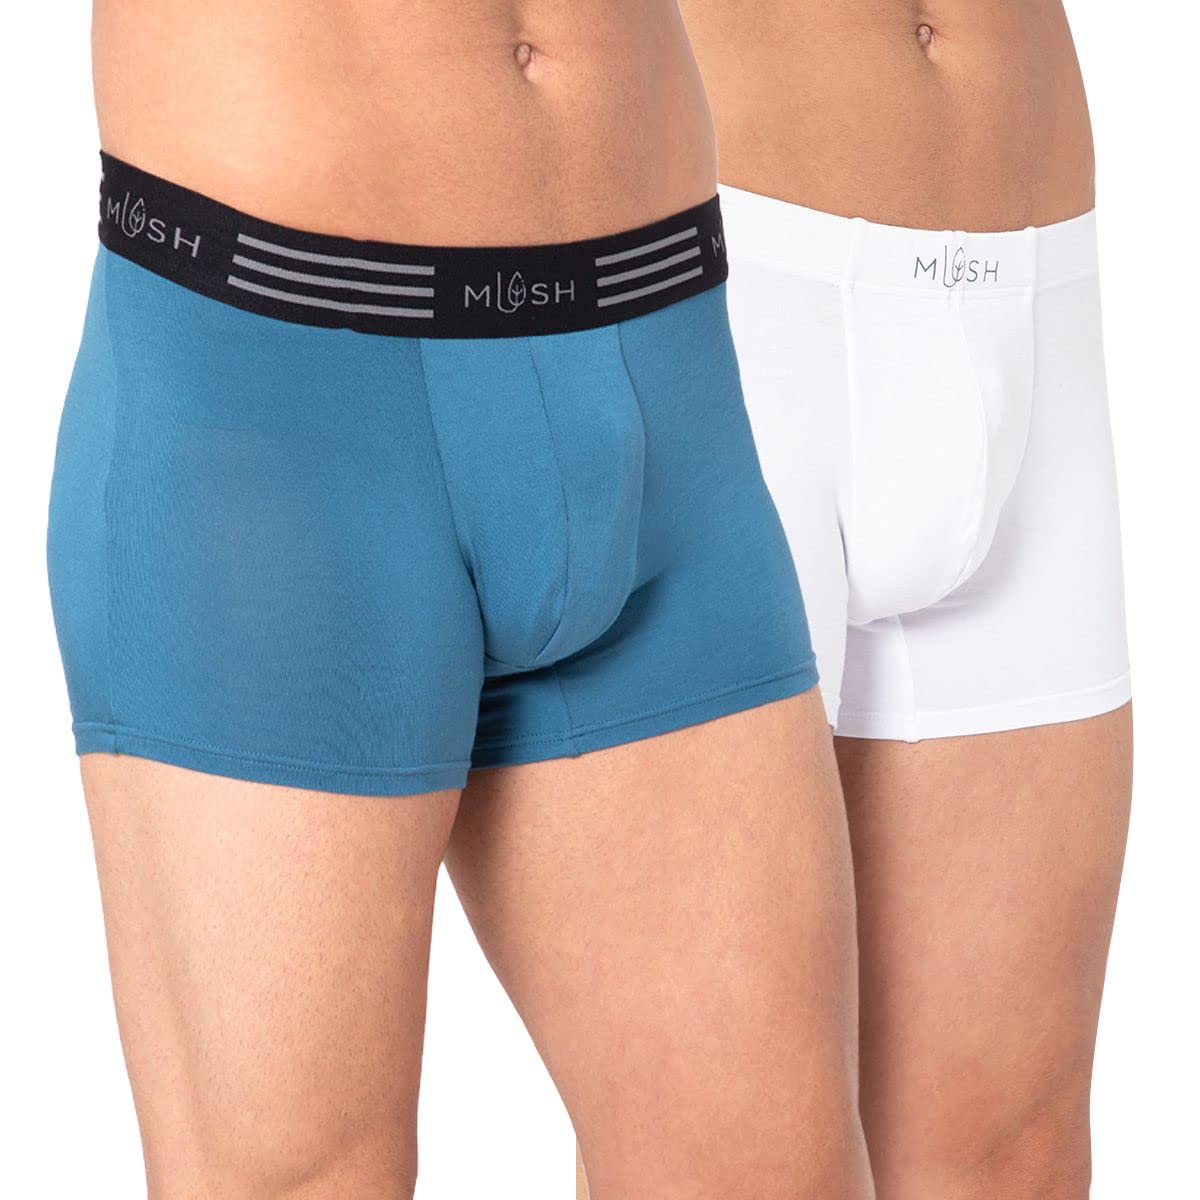 Mush Ultra Soft, Breathable, Feather Light Men's Bamboo Trunk || Naturally Anti-Odor and Anti-Microbial Bamboo Innerwear Pack of 2 (XL, Blue and White)